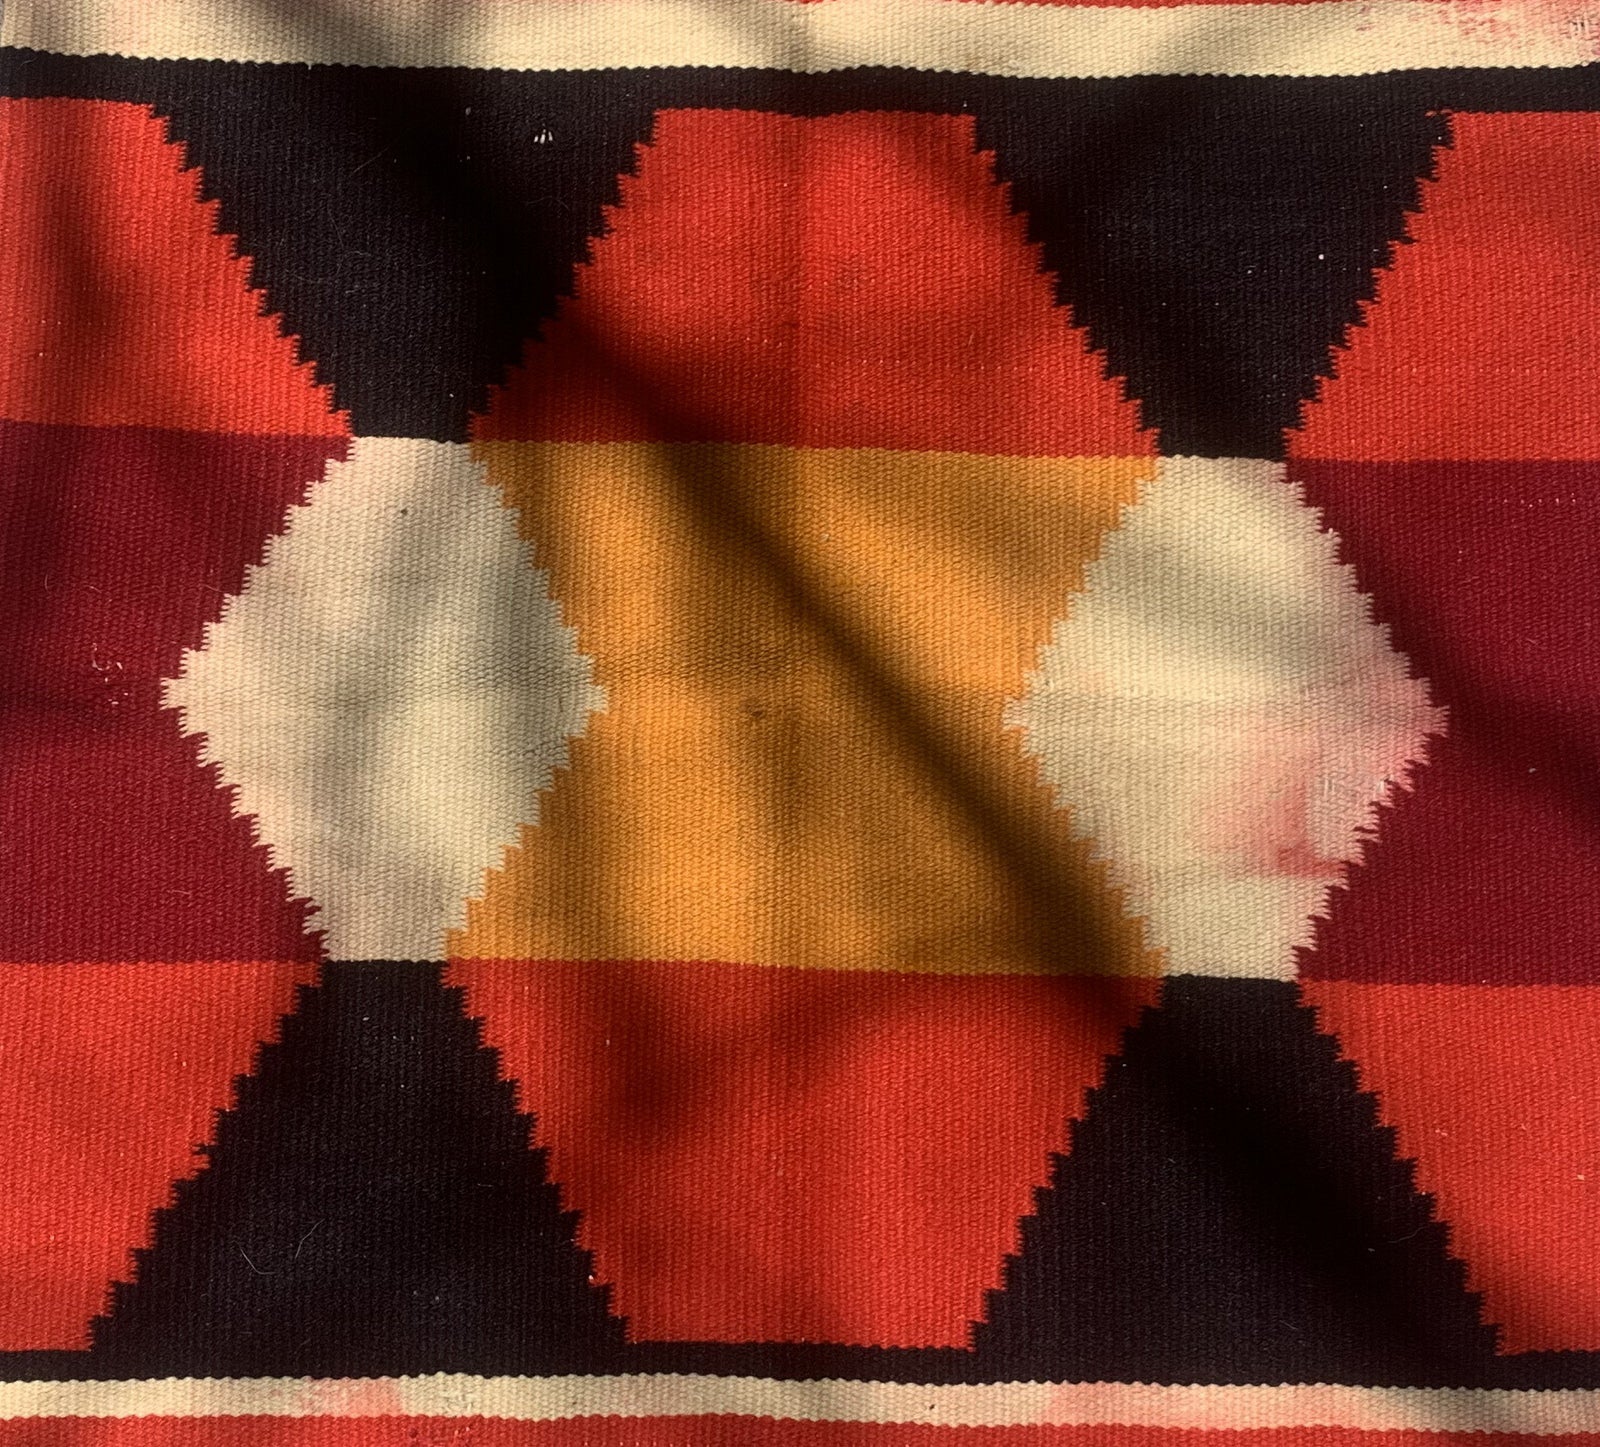 Handmade antique Native American Navajo baby blanket in colorful shades. The rug is from the end of 19th century in original condition, it has some age discolorations.